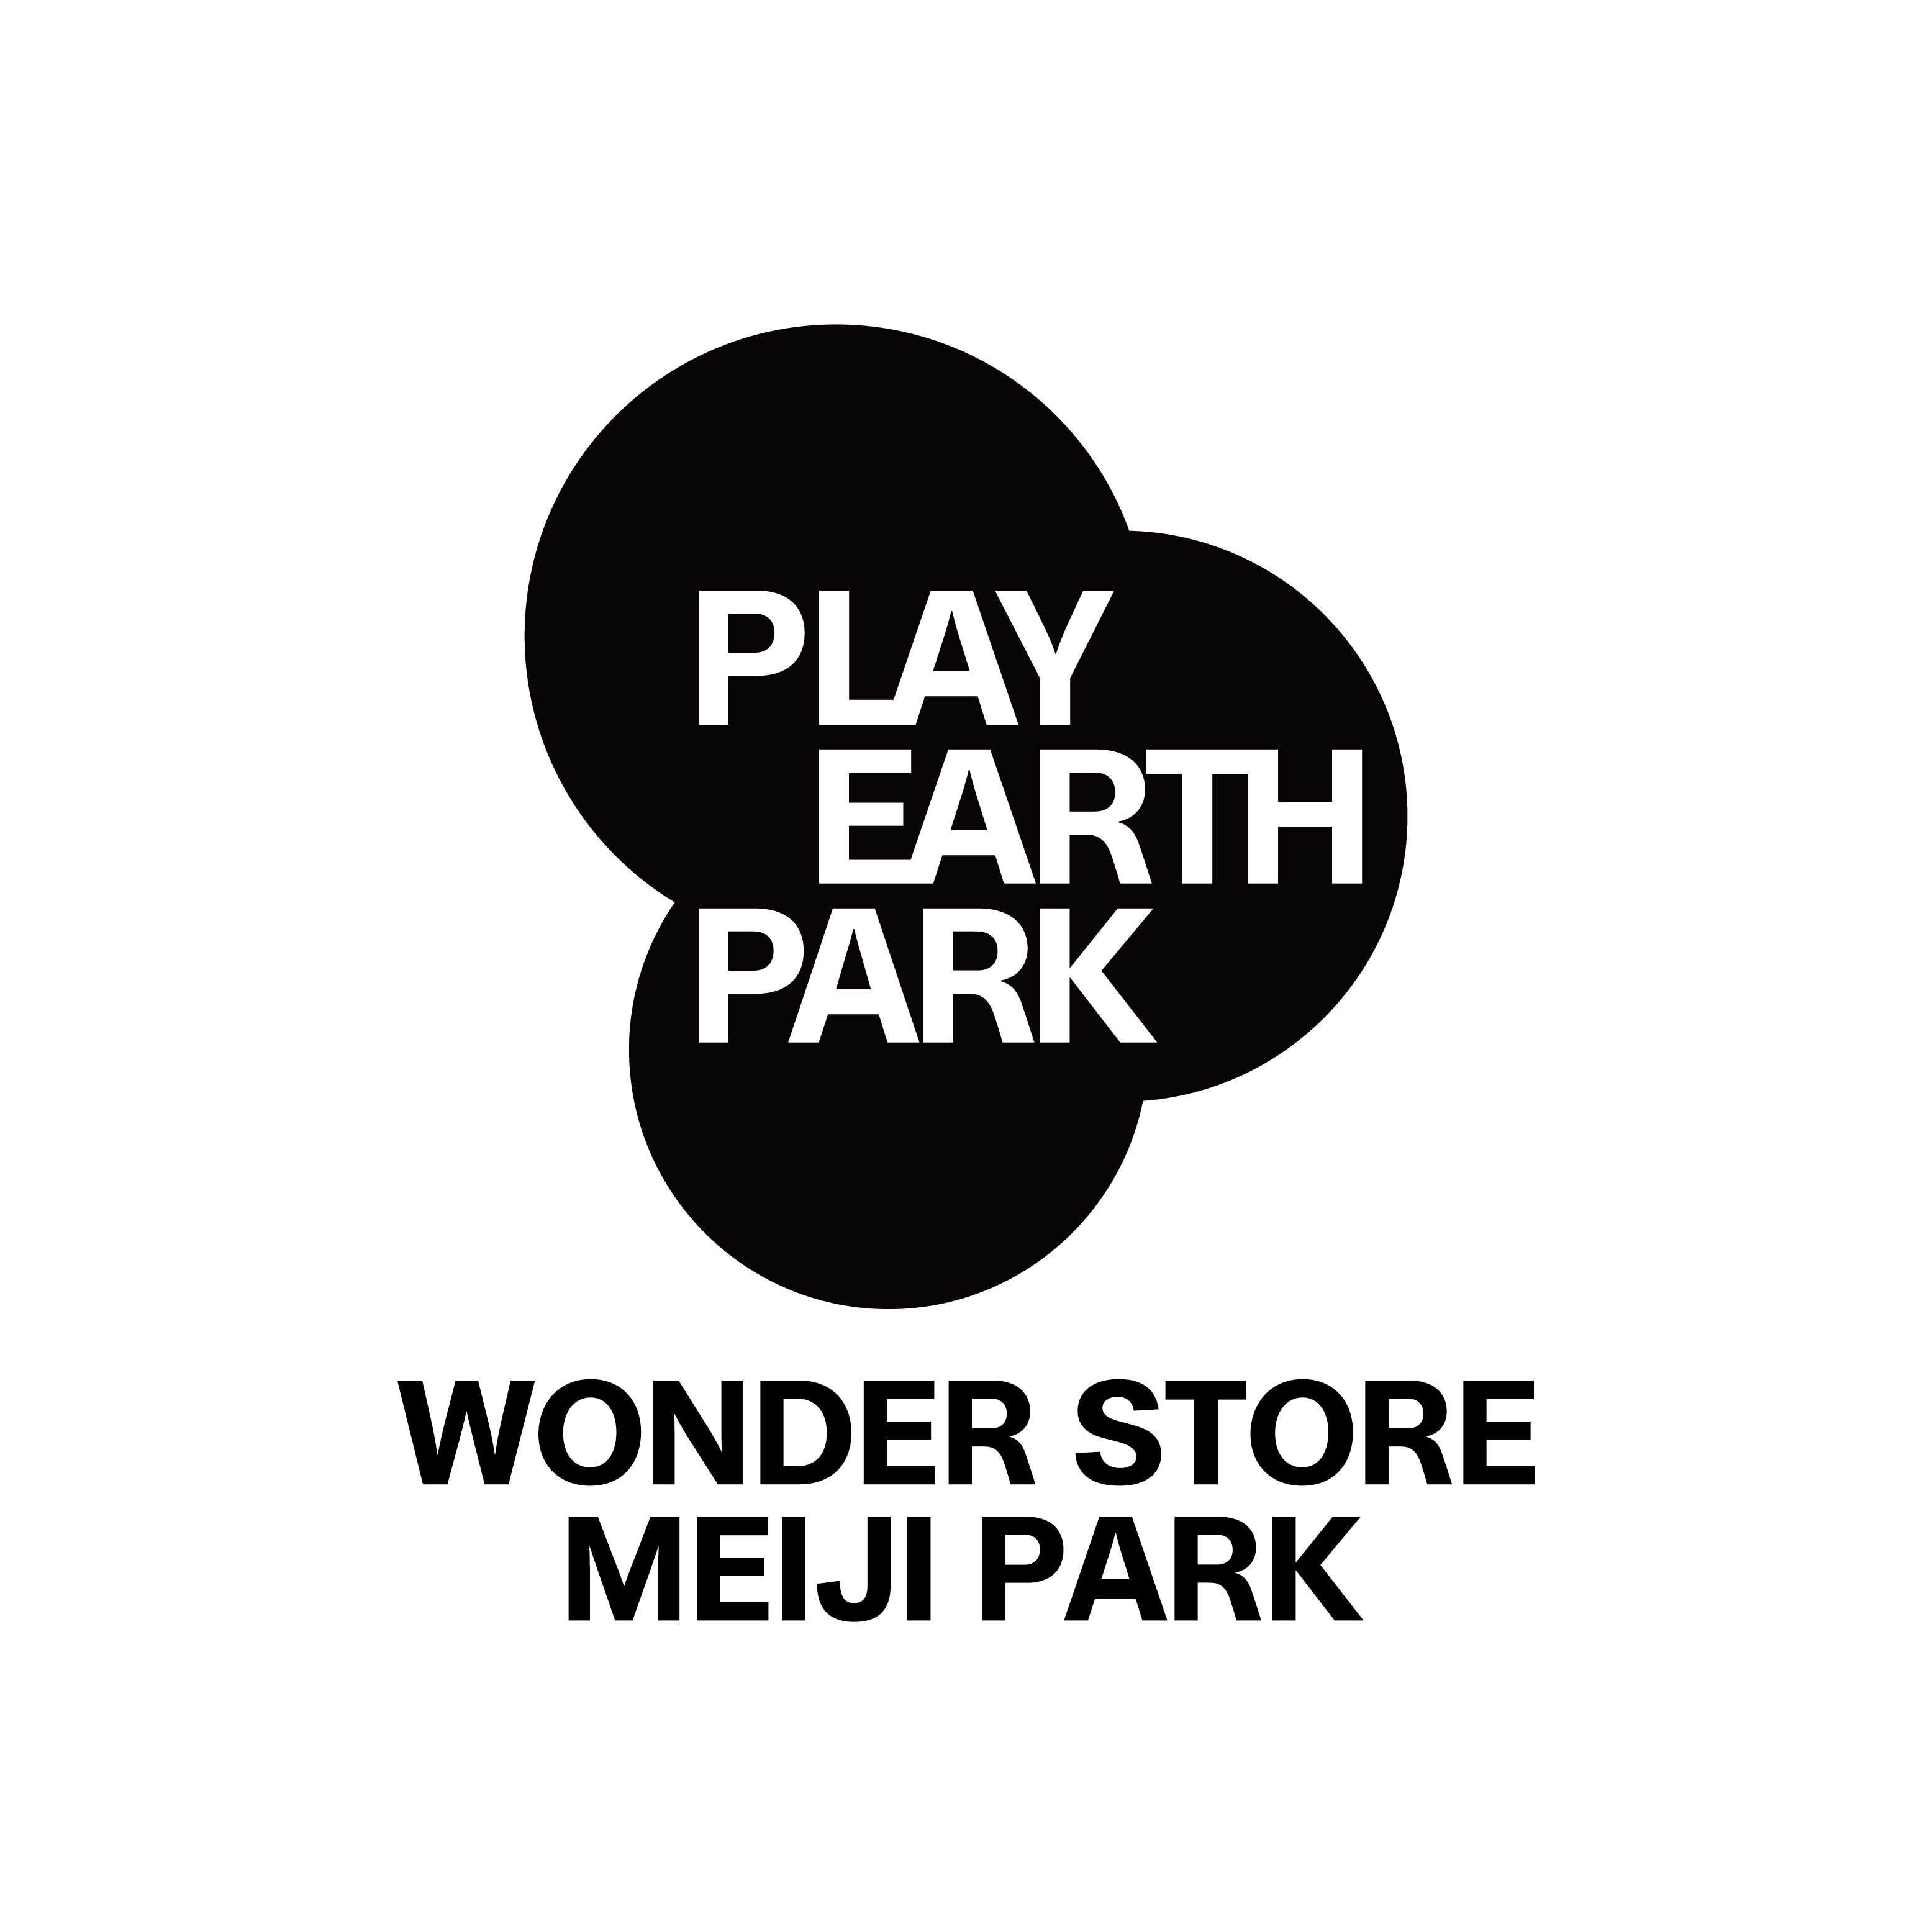 PLAY EARTH PARK WONDER STORE (プレイア－スパーク ワンダーストア) 都立明治公園 - Sportswear Store - 新宿区 - 03-6438-9030 Japan | ShowMeLocal.com